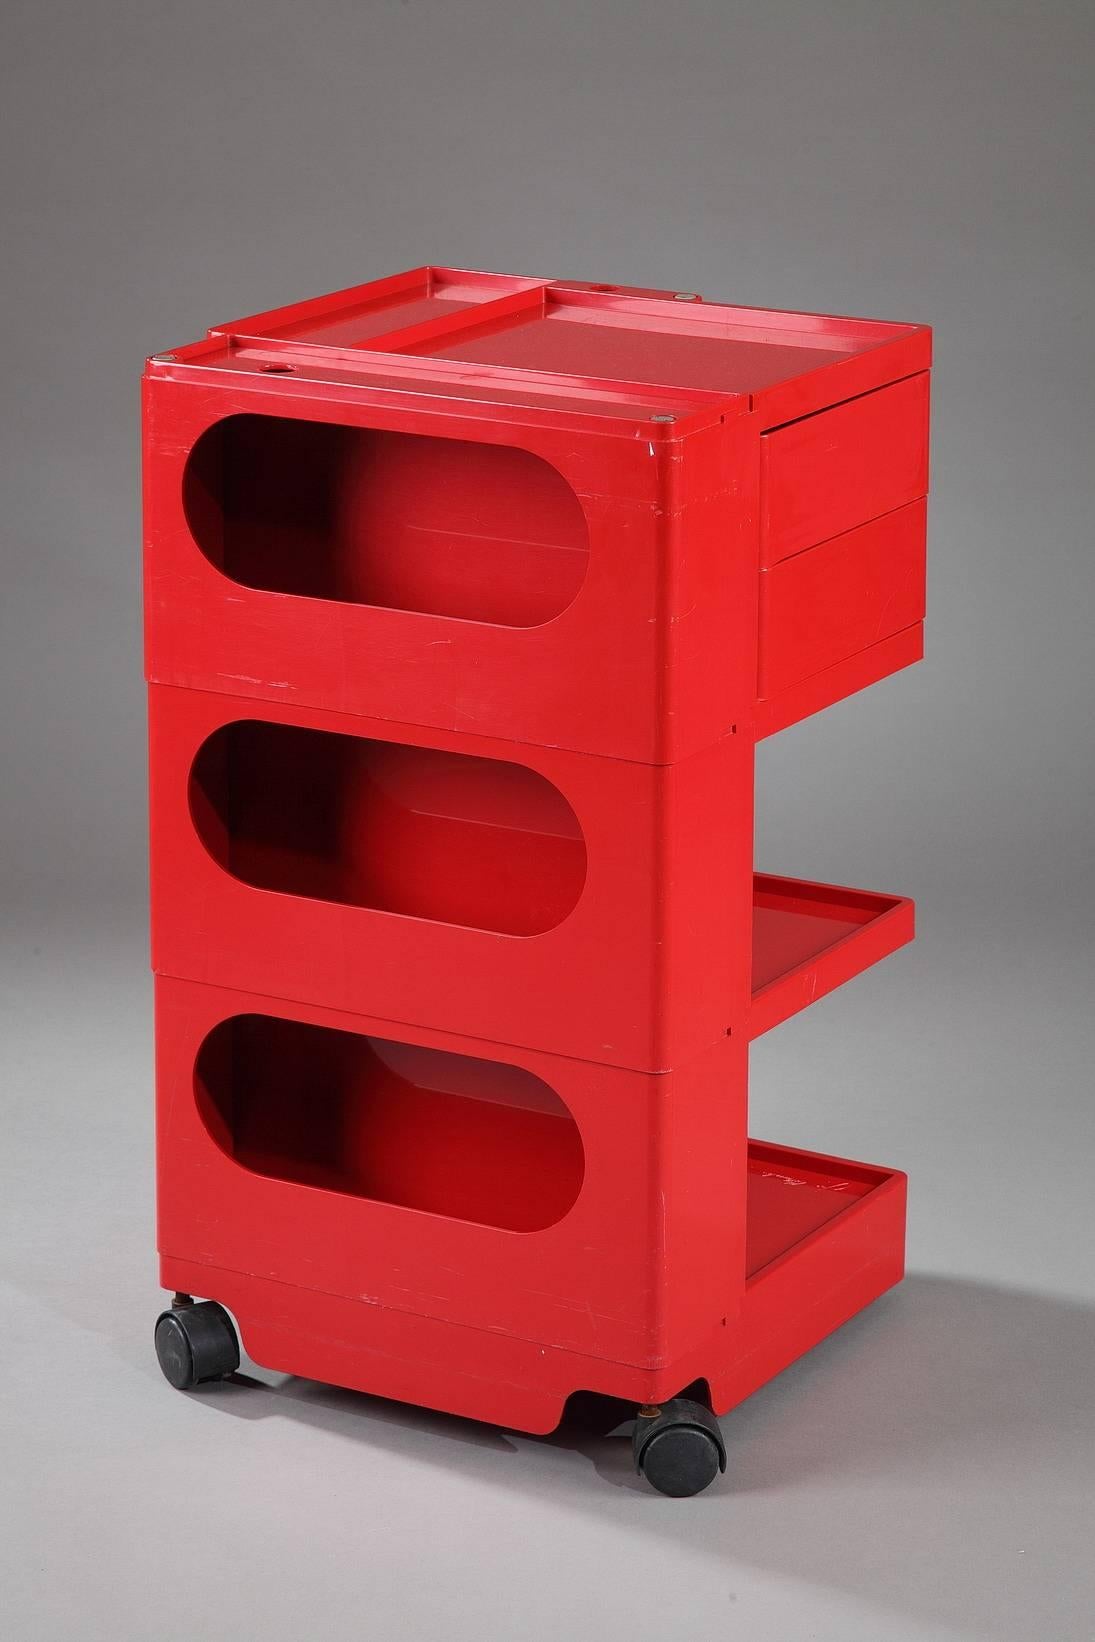 Boby portable storage unit in red plastic designed by Joe Colombo and manufactured during the 1970s. Some scratches. Another storage unit is available.

Boby is much more than a simple container: it is the trolley storage unit that made design